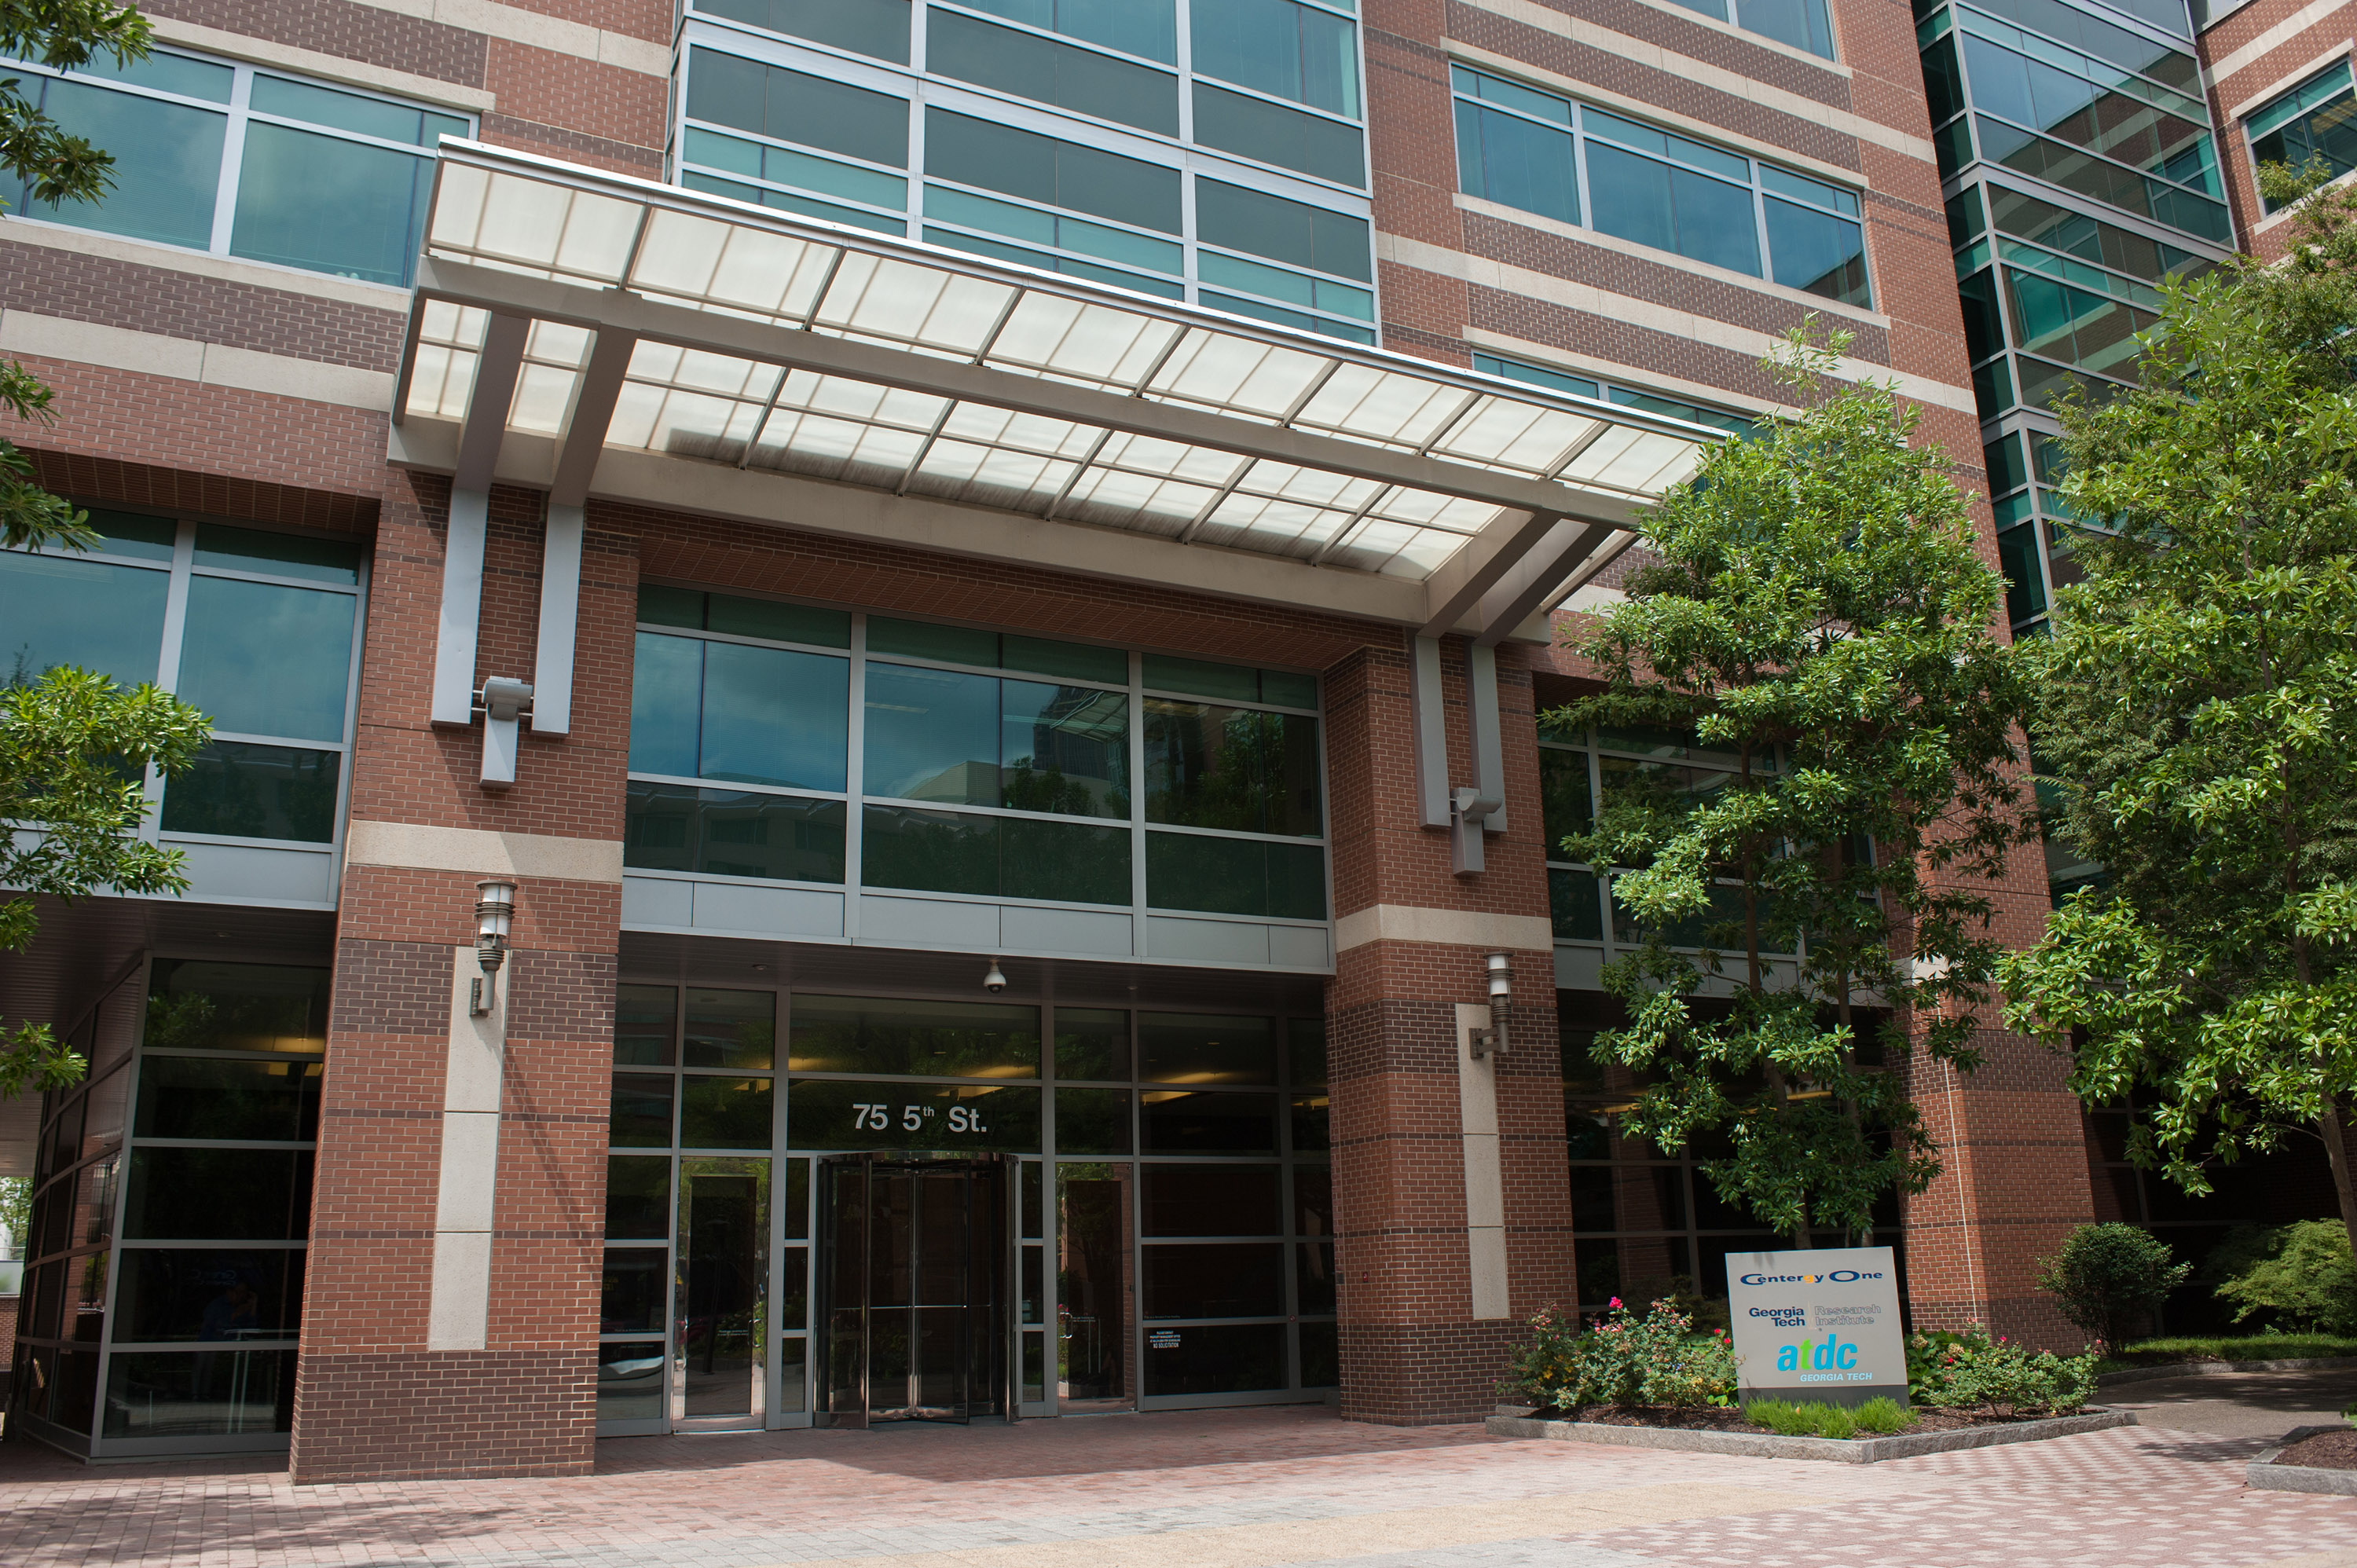 Georgia Tech's Center for the Development and Application of Internet-of-Things Technologies (CDAIT) is housed within the Georgia Tech Research Institute and located in the Centergy Building in Tech Square.